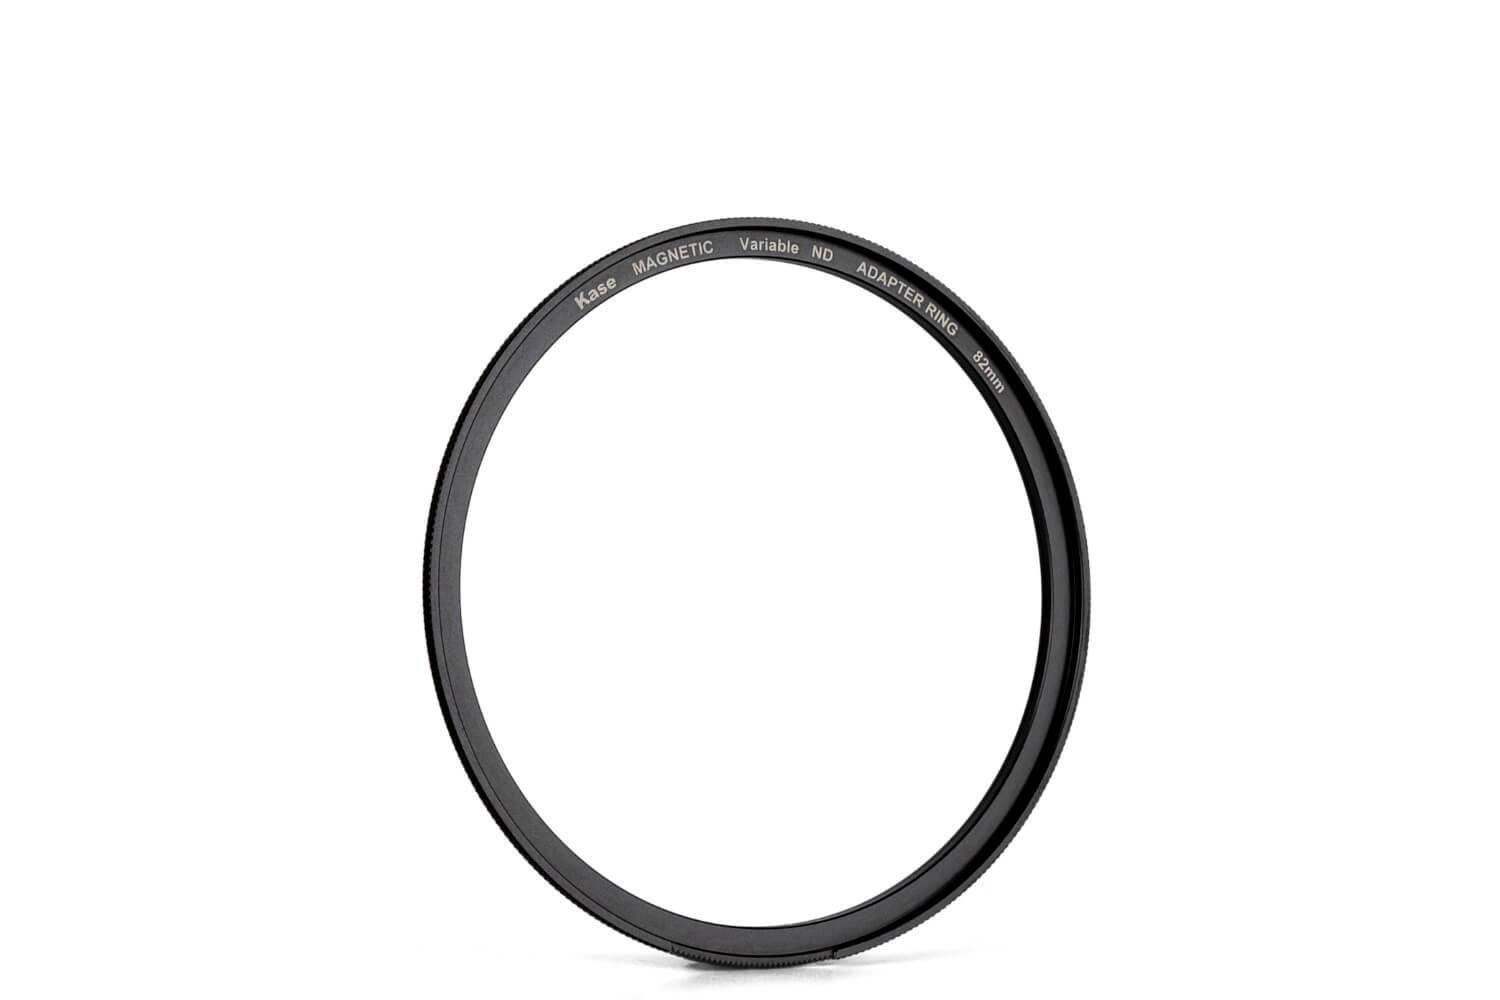 ROUND Magnetic Variable ND Filter 6-9 Stops